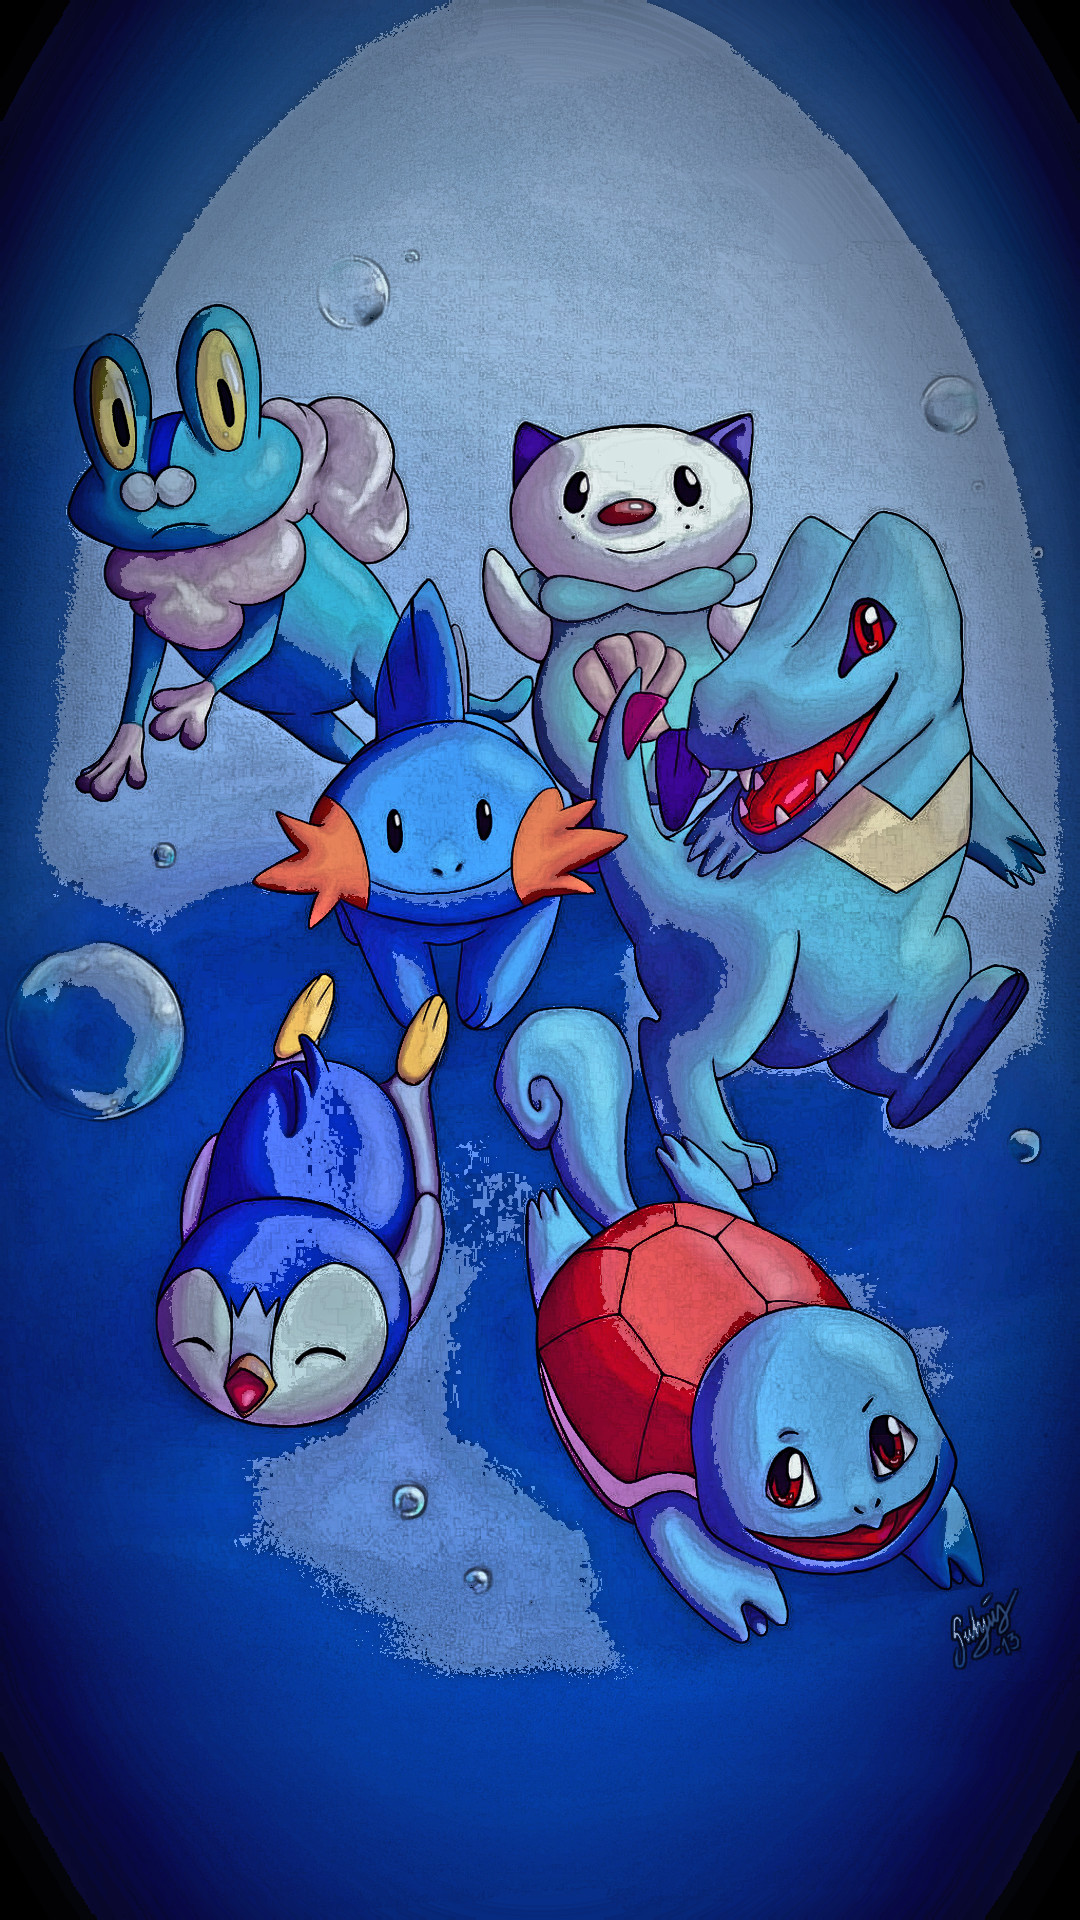 1080x1920 Pokemon phone wallpaper for 2/28/15 is here. I apoligize for and late  requests. If you want a pokemon on your phone, let me know, and I'll make  it for you.